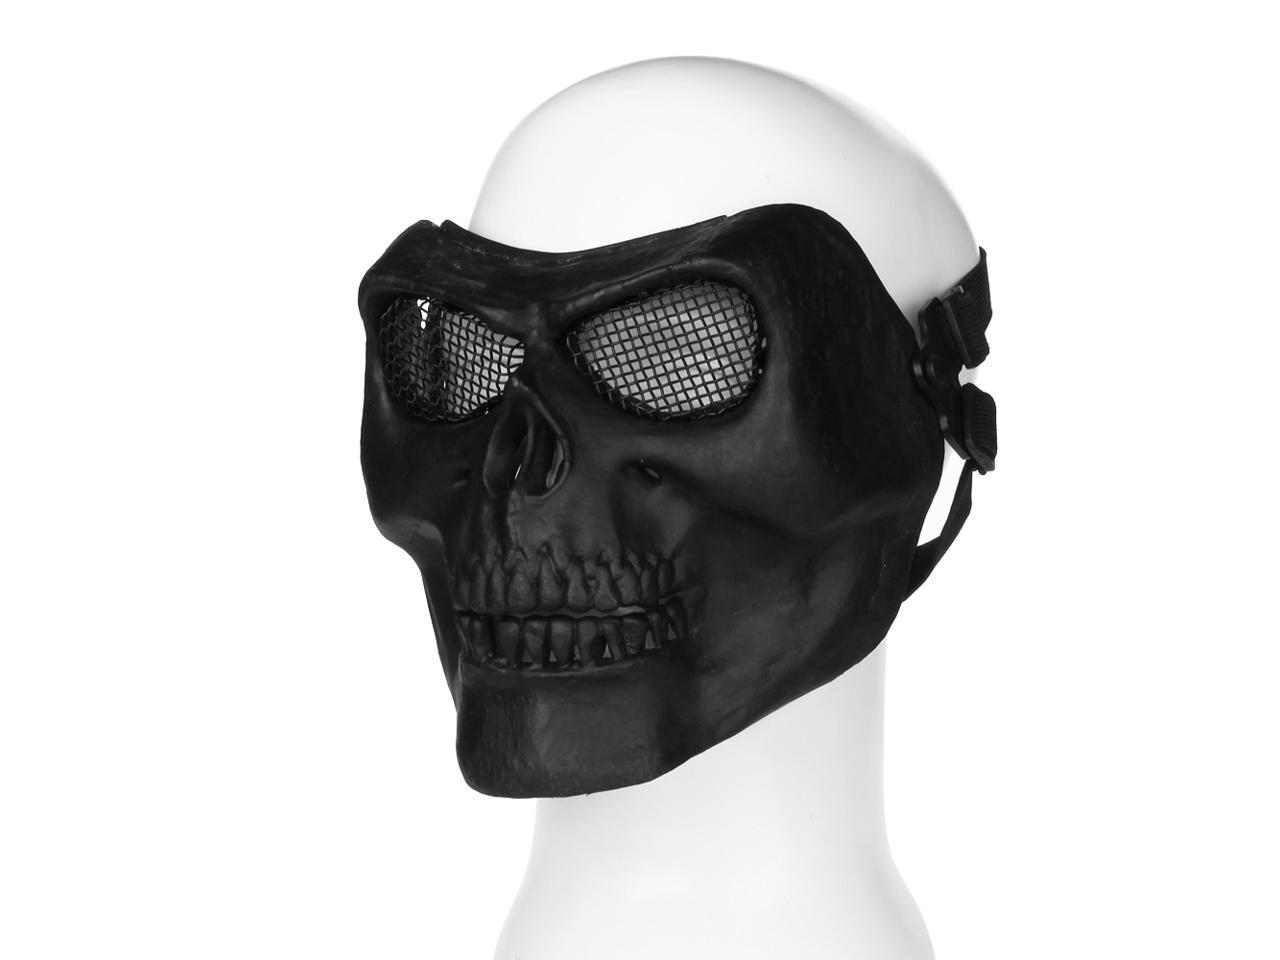 Details about   Skull Airsoft Tactical Mask Full Face Protective Paintball Skeleton w Goggles US 